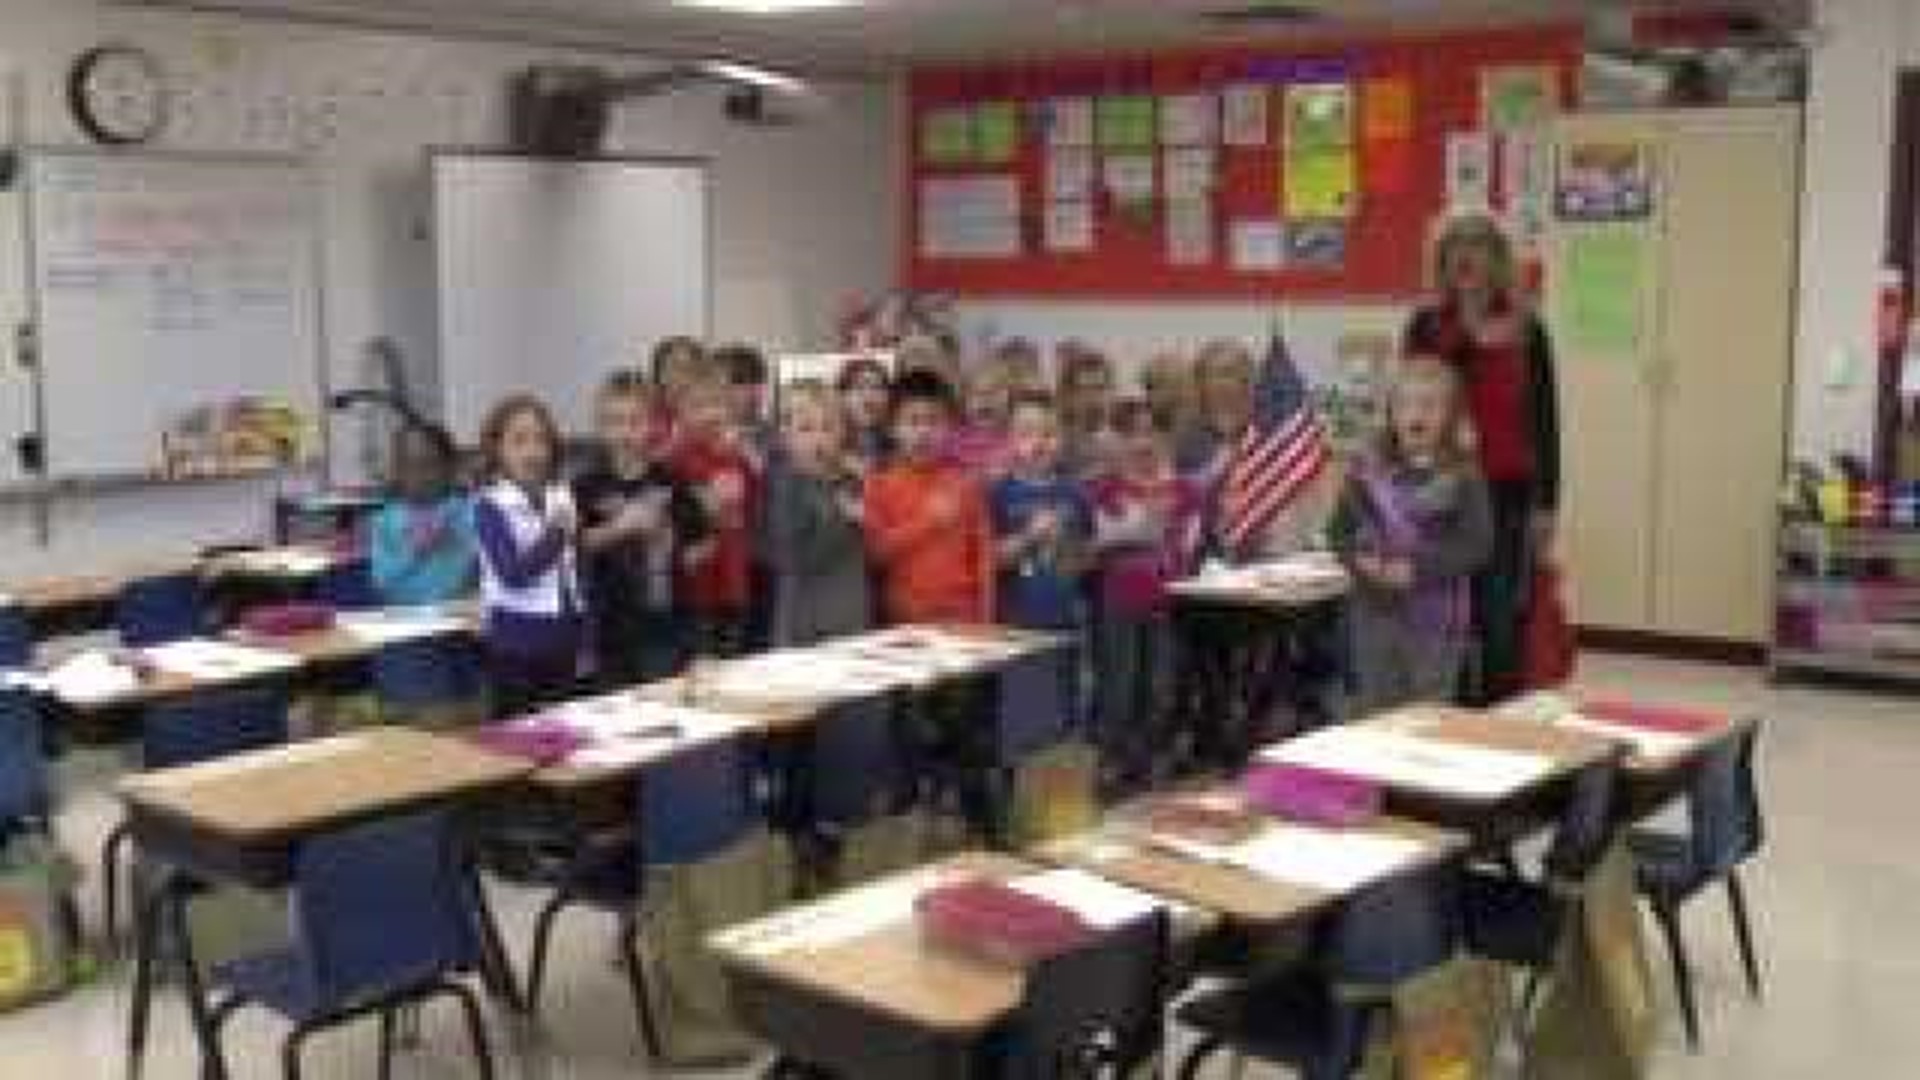 Mrs. Brown's class says the Pledge of Allegiance